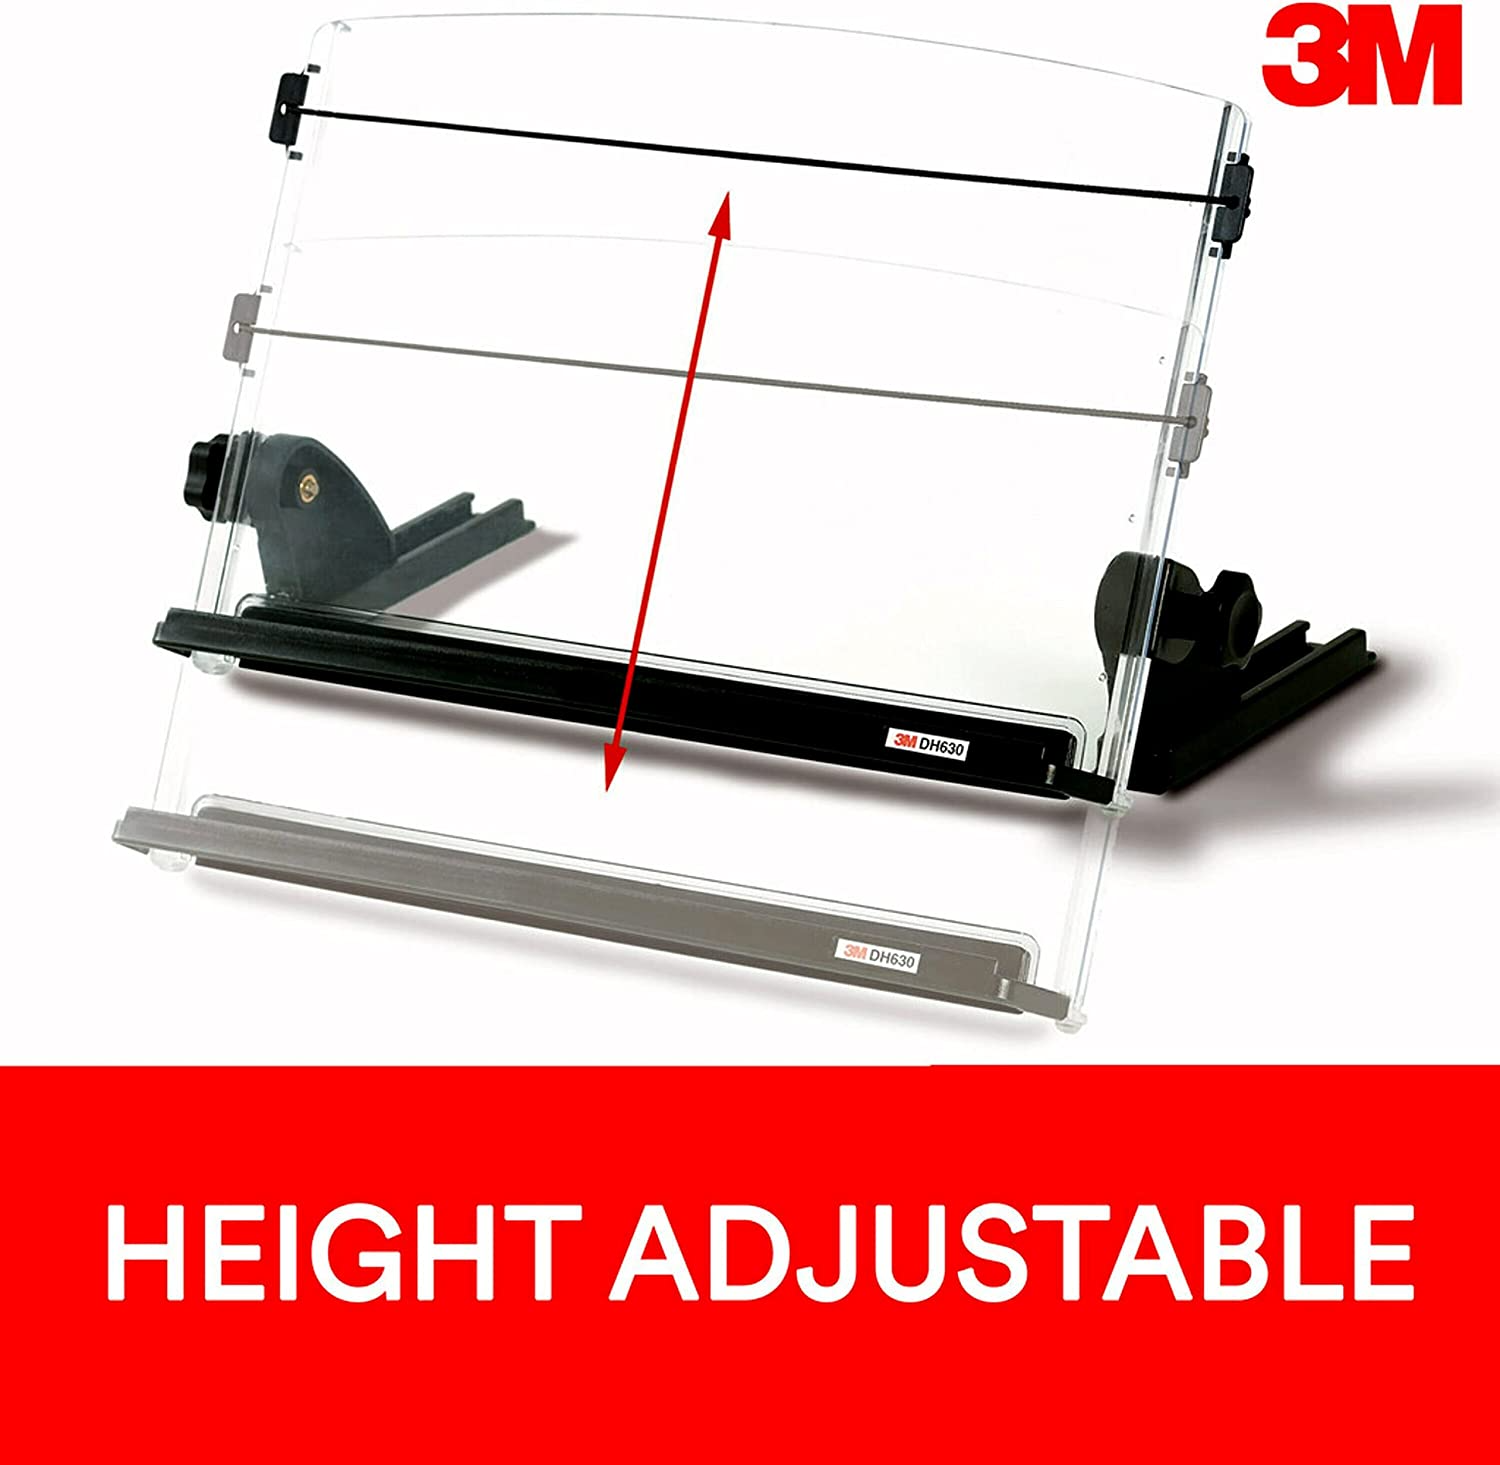 3M A4 Document Holder (DH630MB)